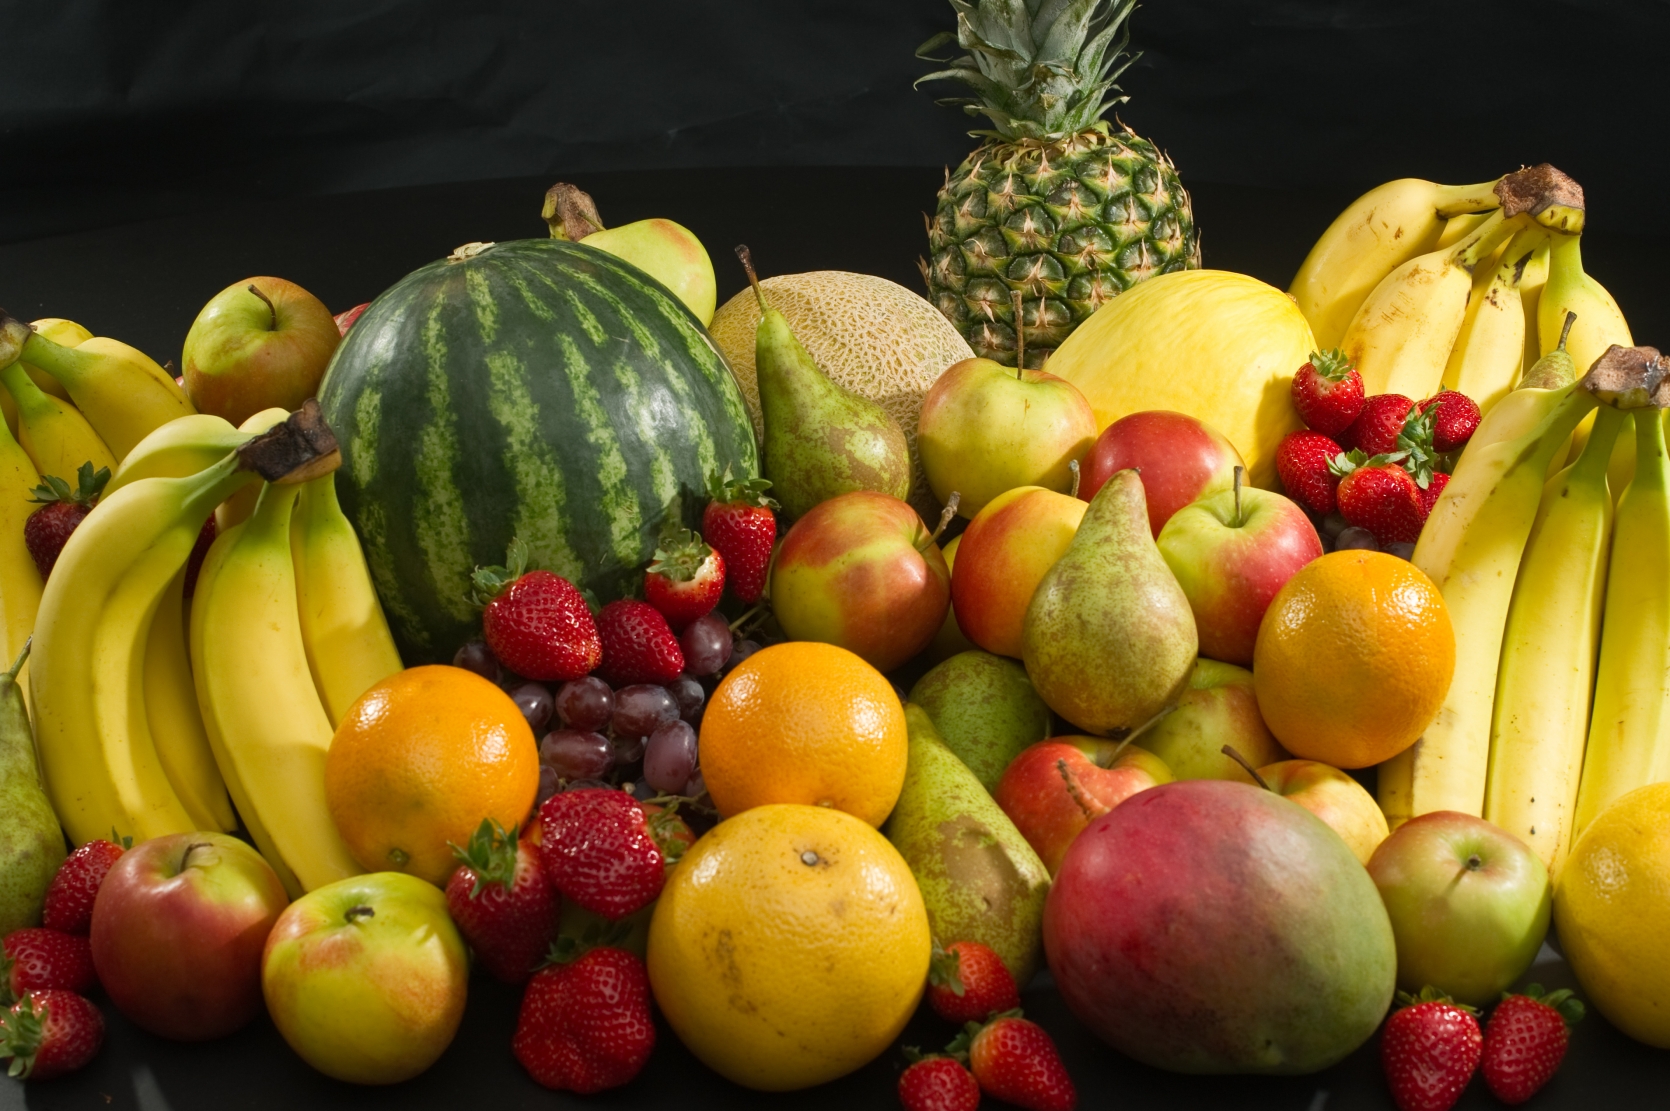 SCIENTISTS ARE STORING ENERGY USING UNEATEN FRUIT